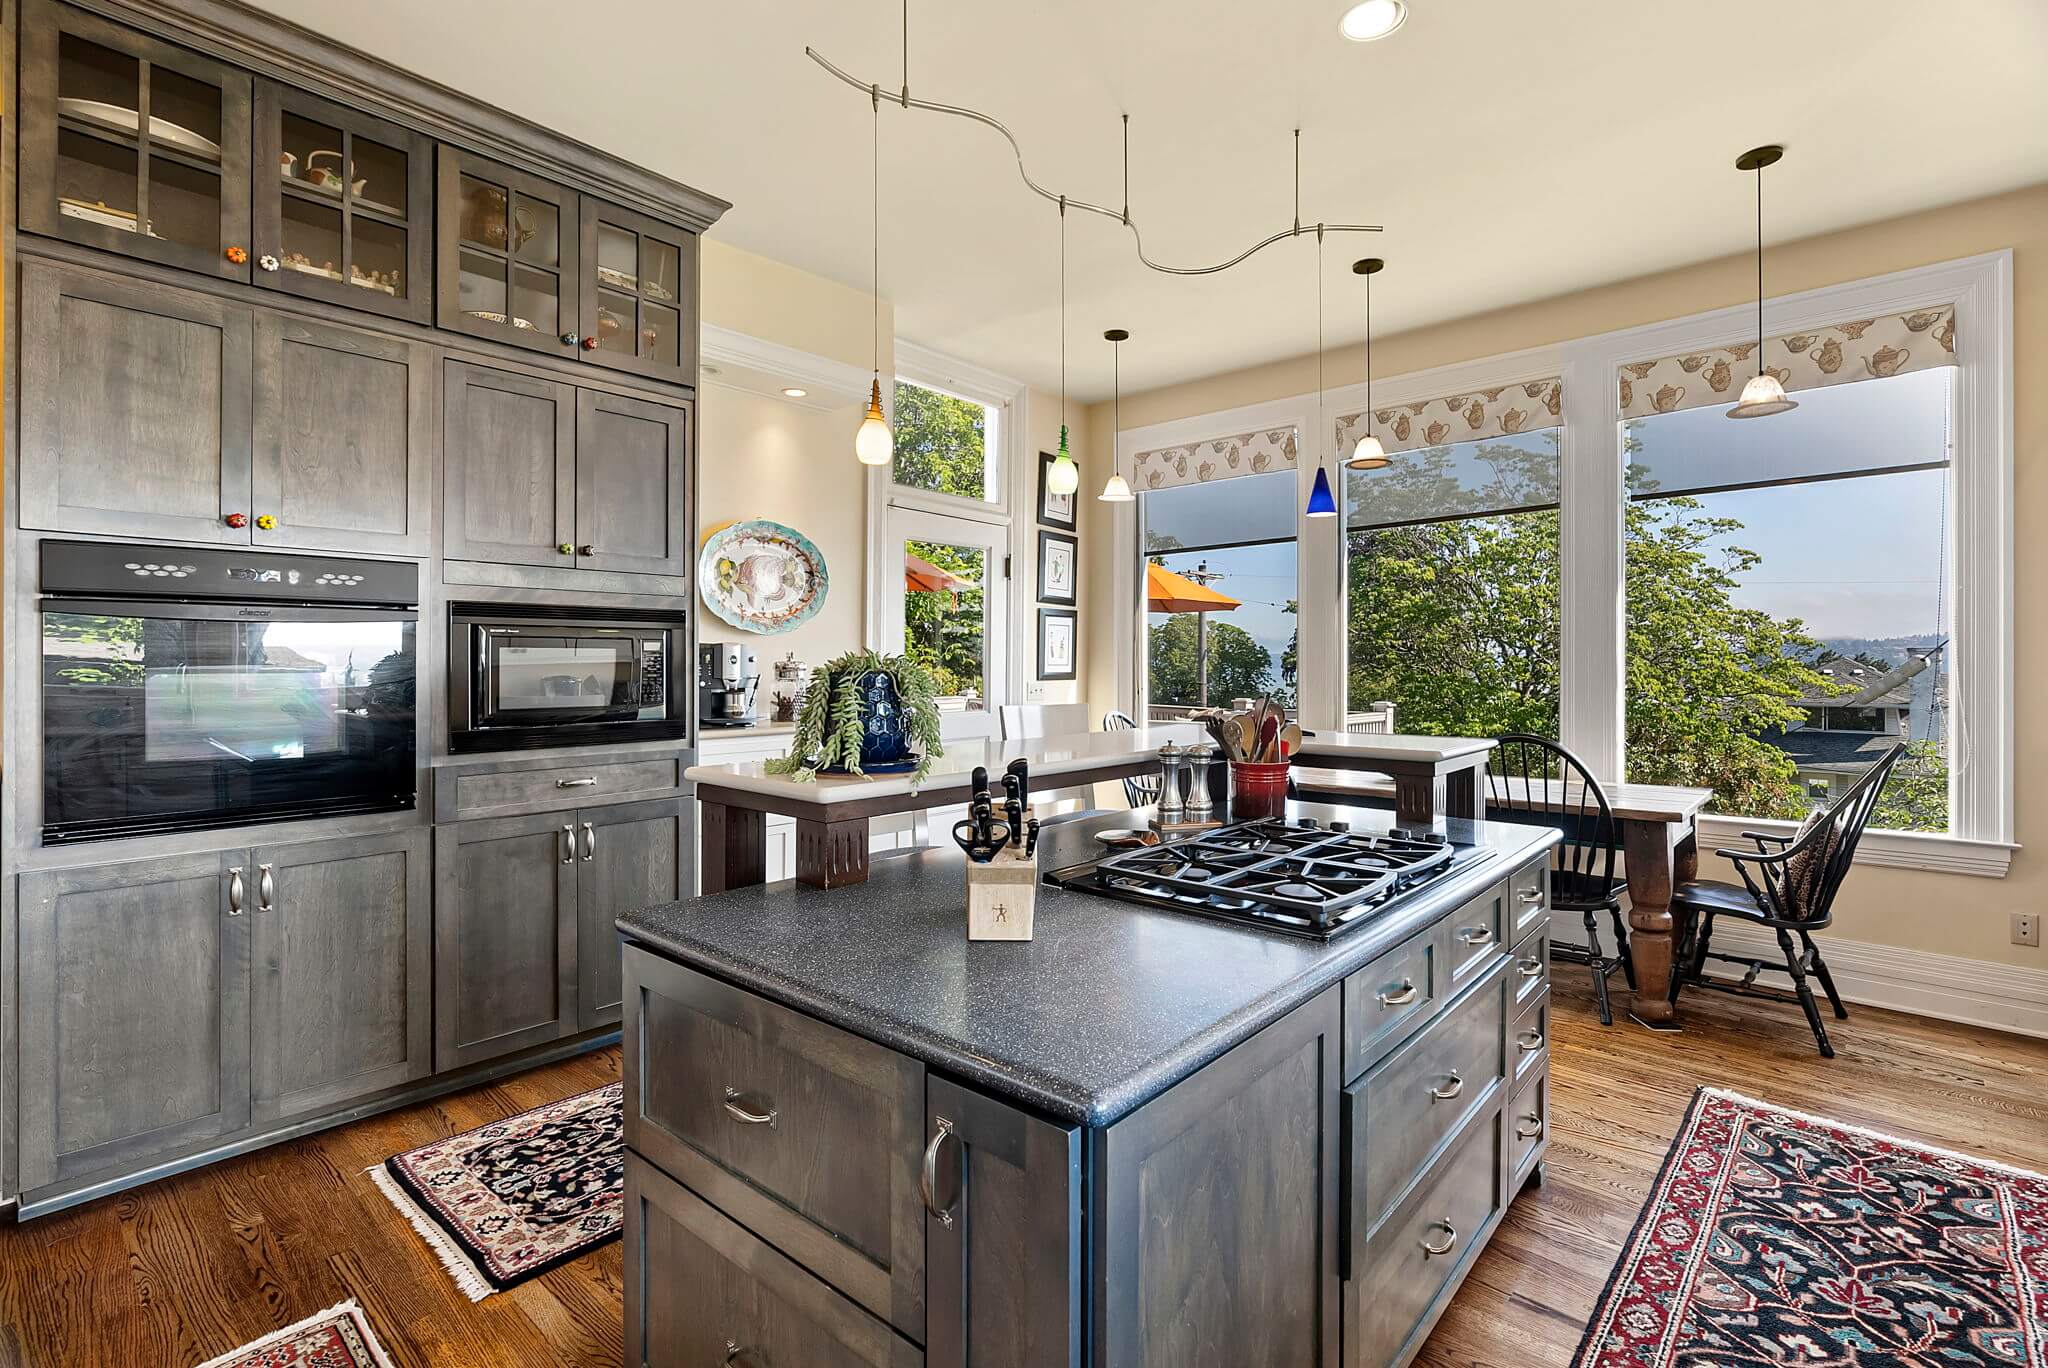 Kitchen features a central island and ample storage